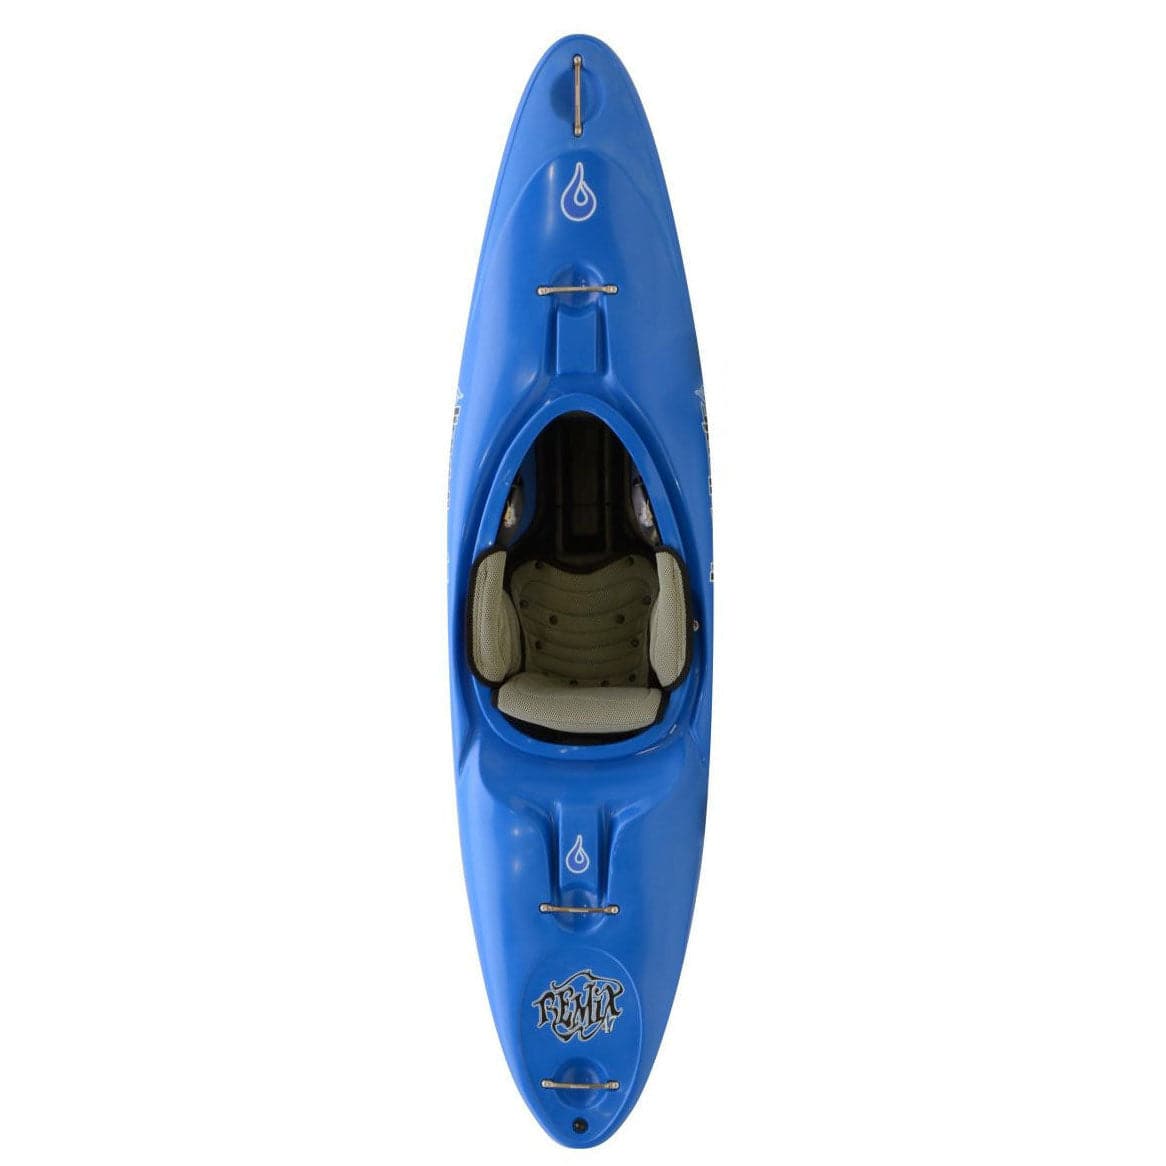 Featuring the Remix 47 kids kayak manufactured by LiquidLogic shown here from one angle.